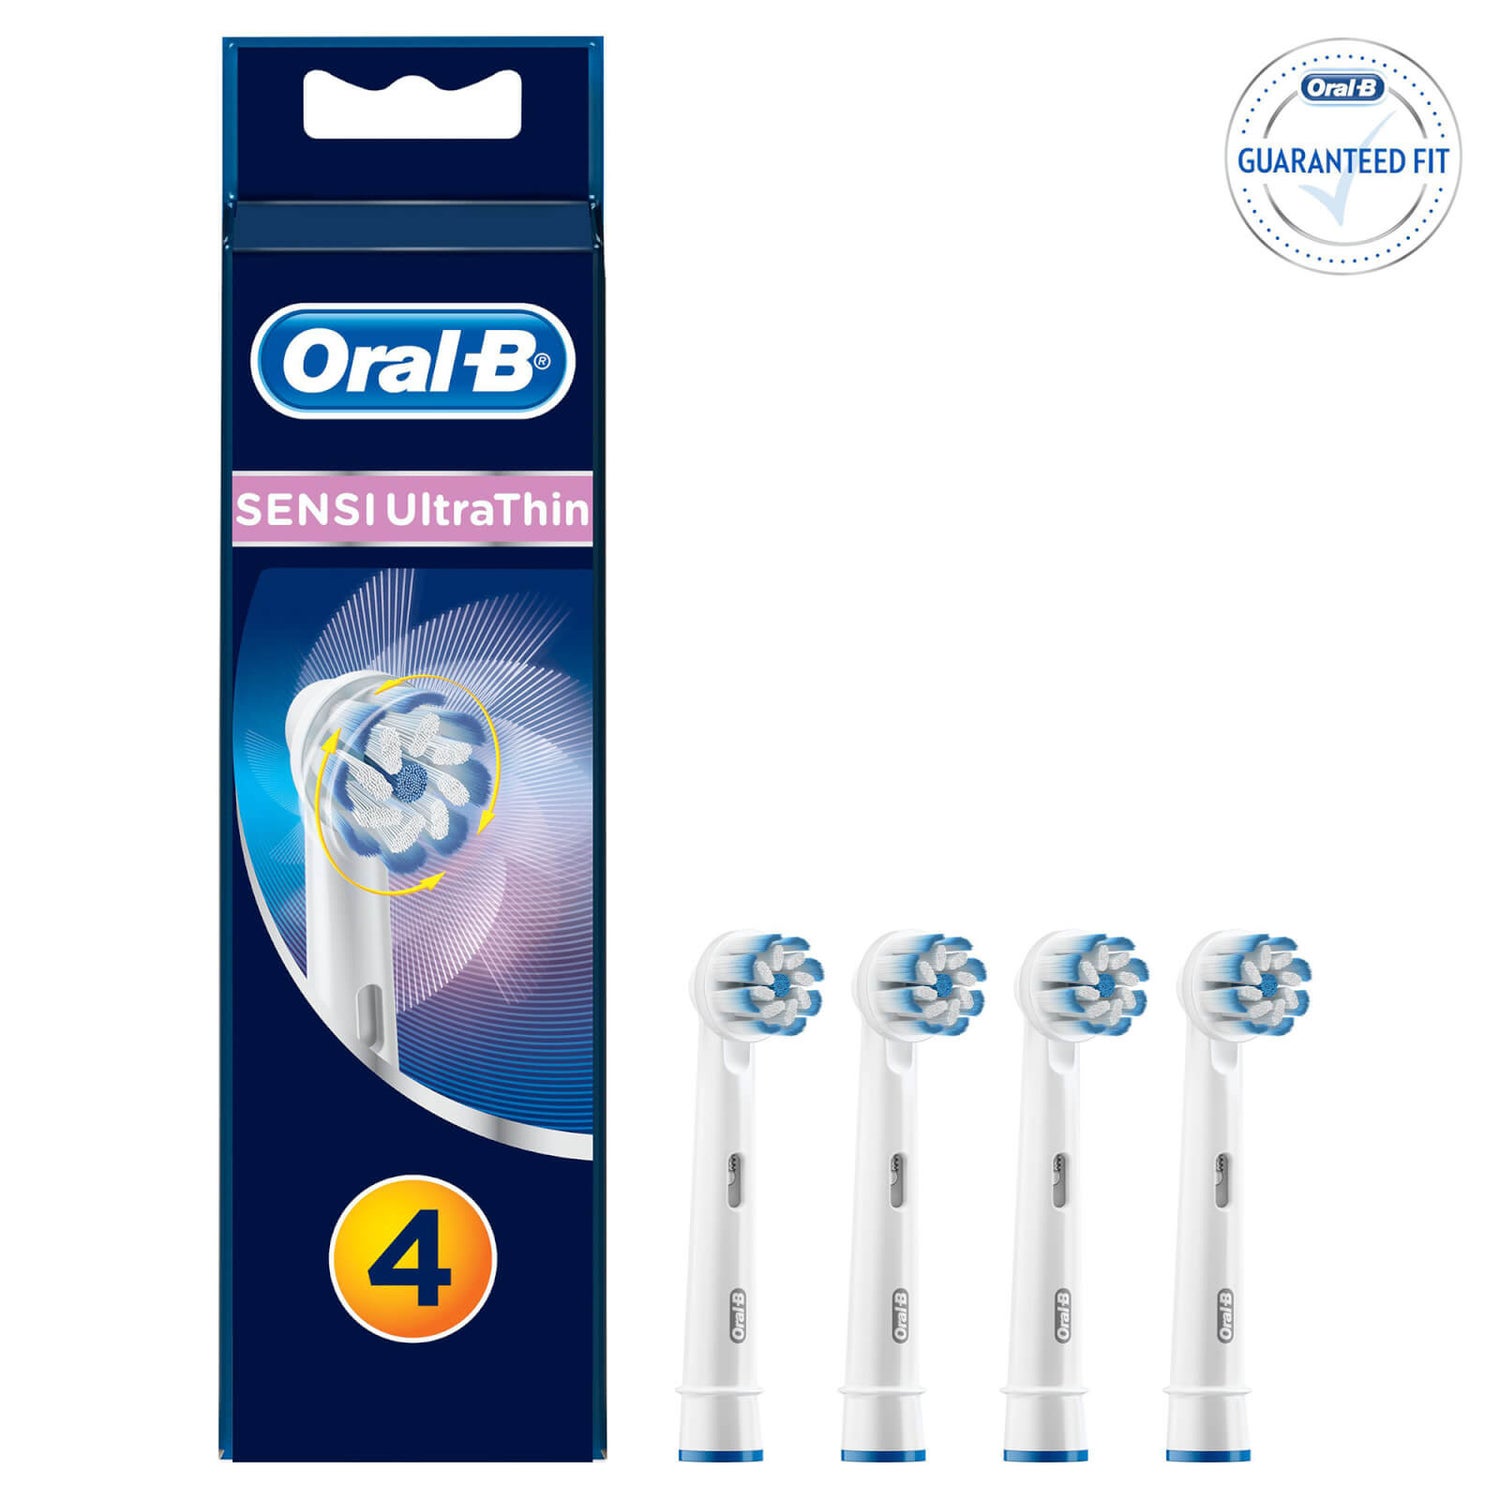 Oral B Sensi UltraThin Replacement Toothbrush Heads (Pack of 4)